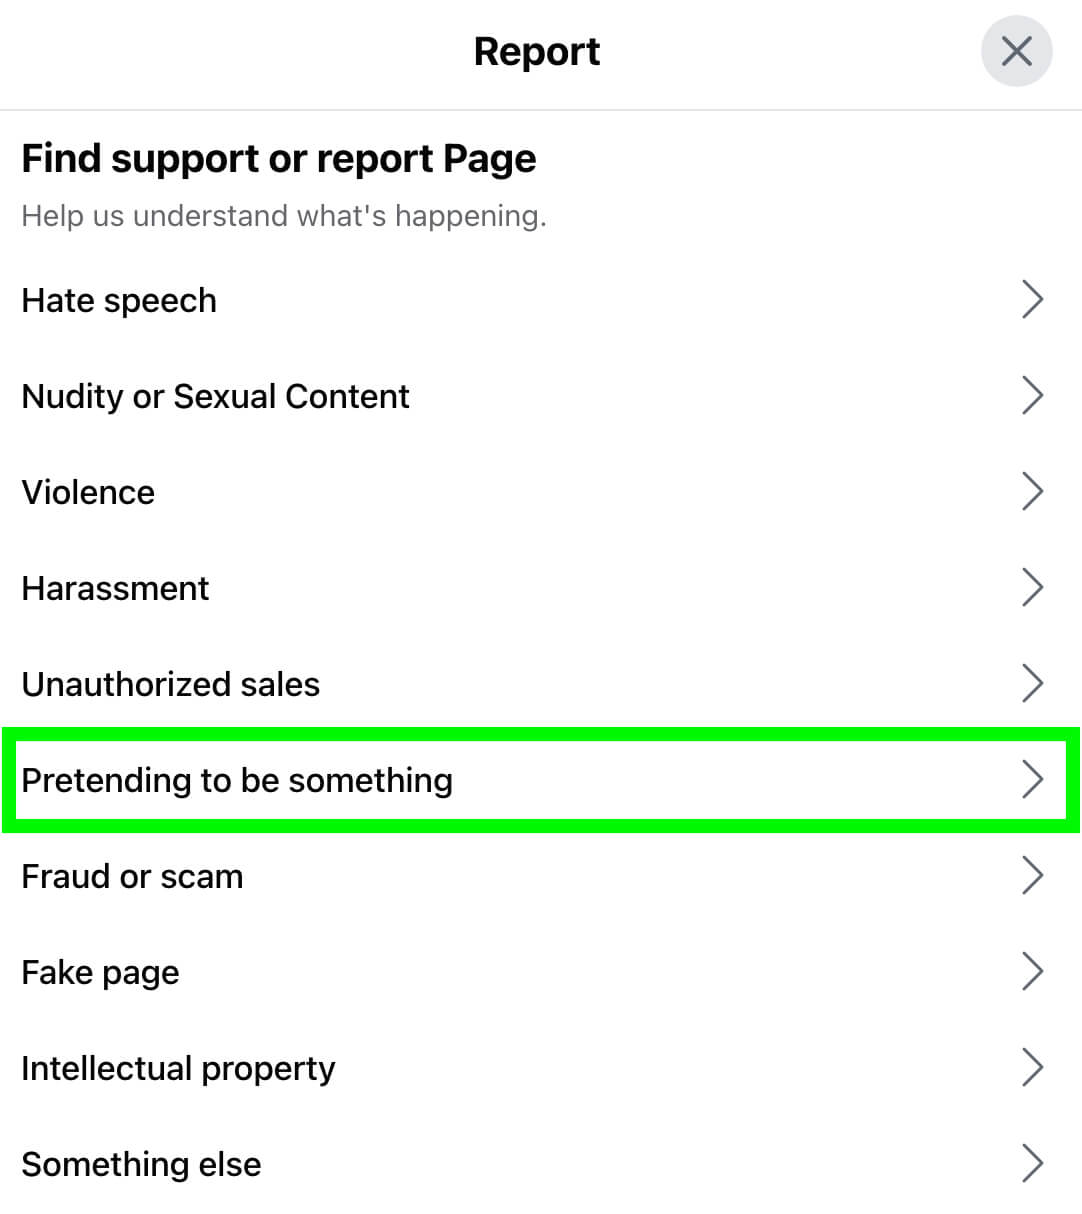 how-to-report-facebook-pages-impersonating-your-business-new-pages-experience-find-support-or-report-page-pretending-to-be-something-example-1